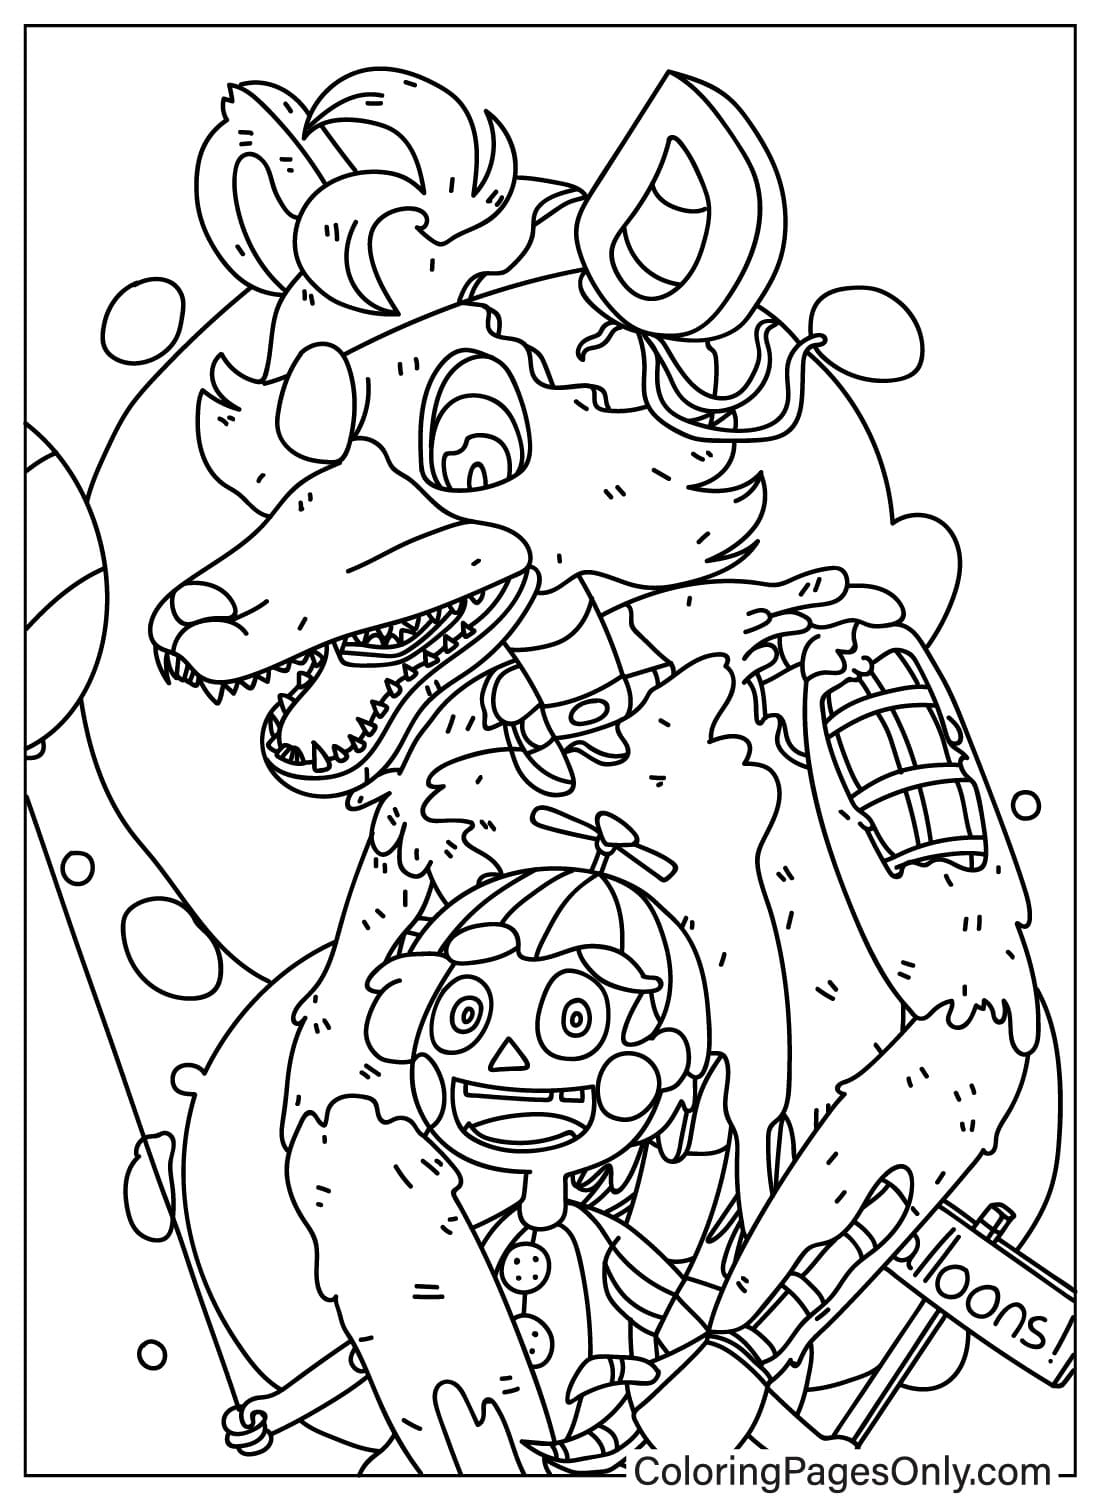 Balloon Boy and Foxy Coloring Page Free from Five Nights At Freddy's 2